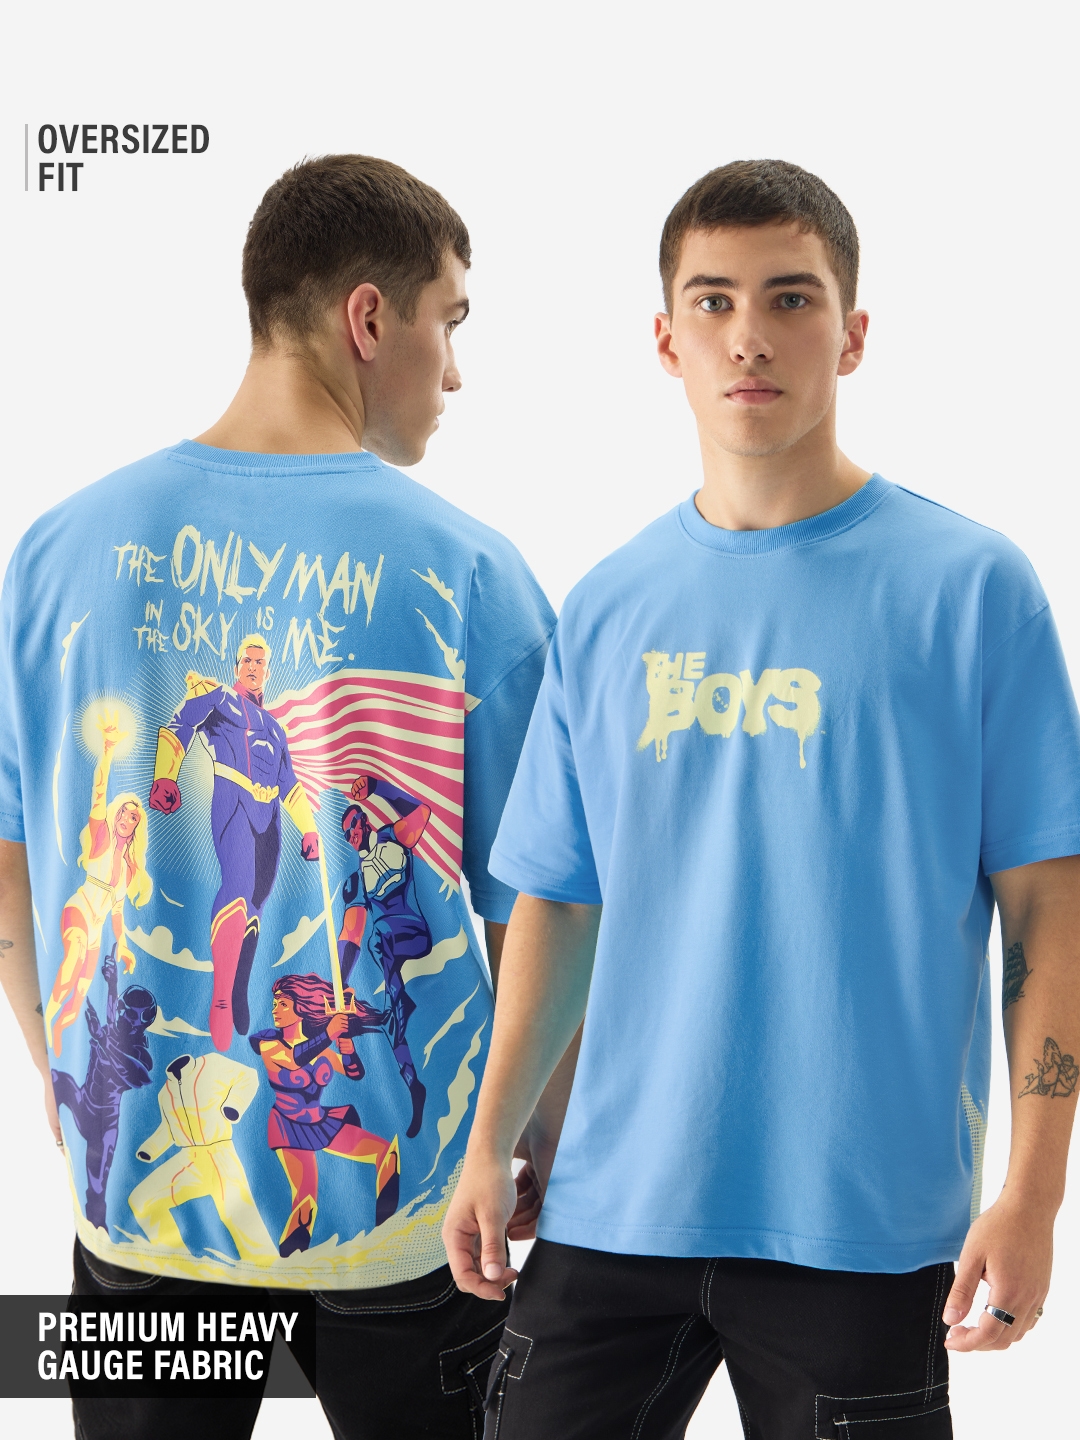 The Souled Store | Men's The Boys Only Man In The Sky Oversized T-Shirts